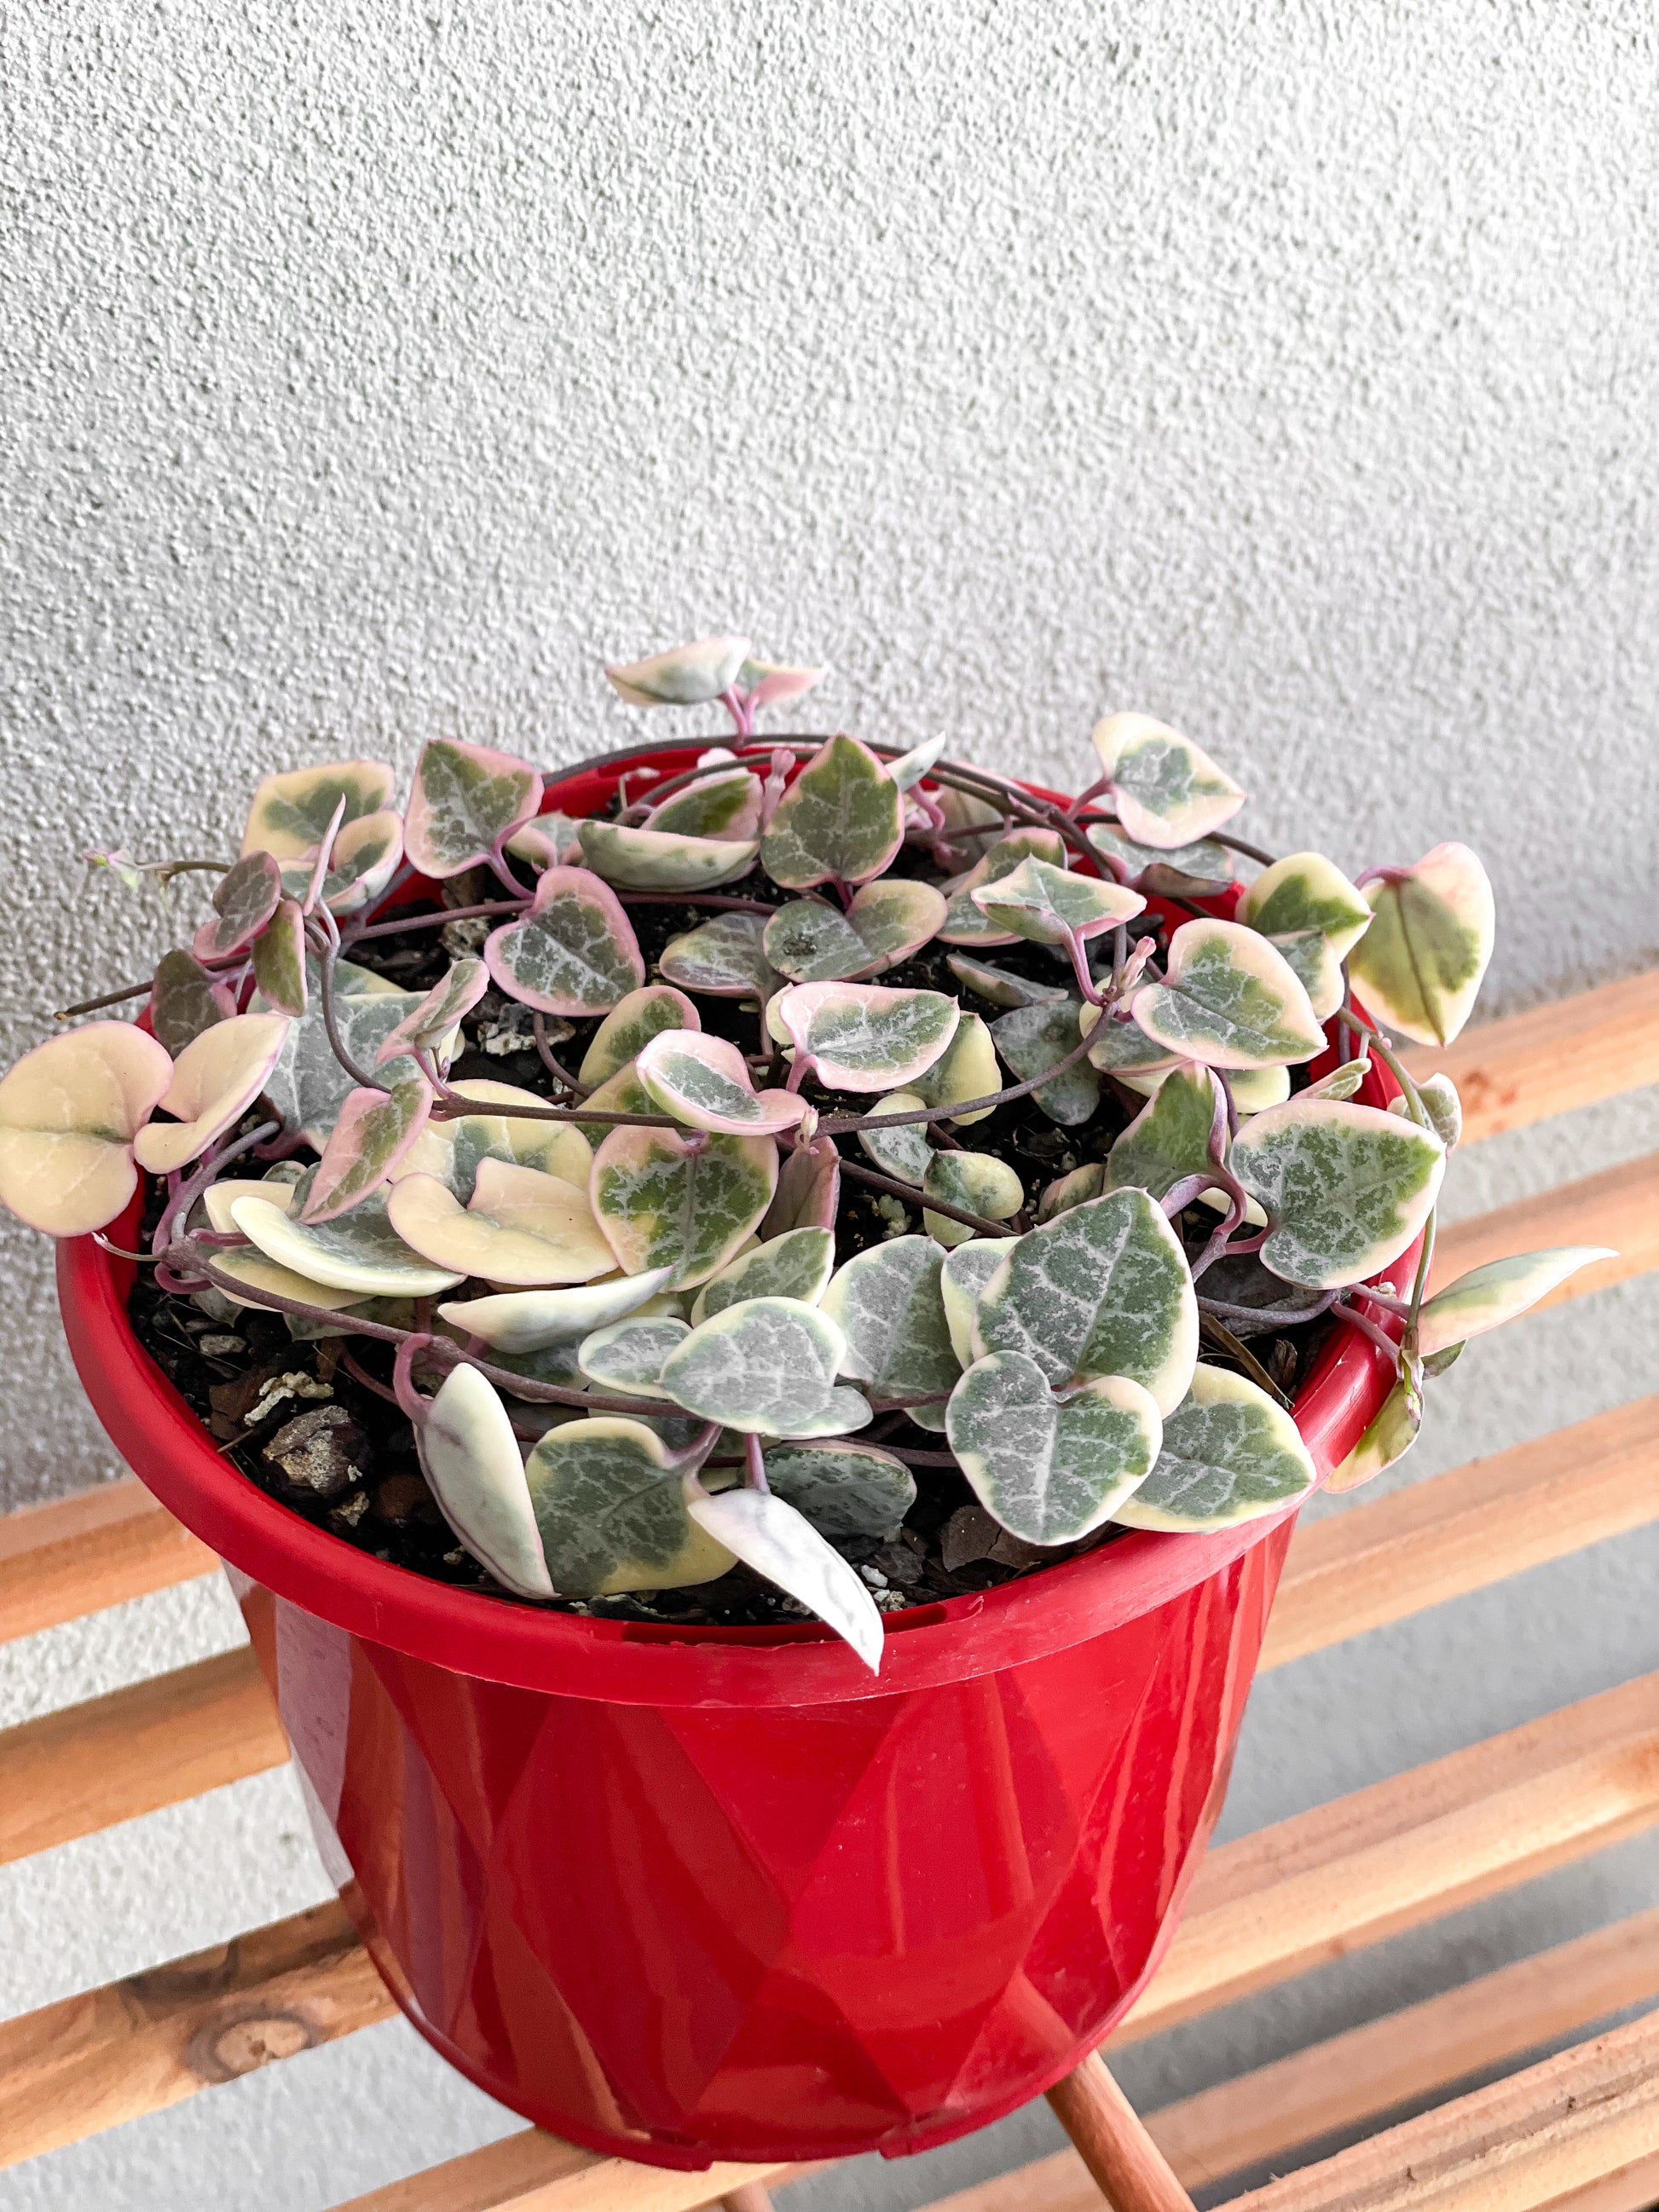 Variegated Chain of Hearts, Variegated Chain of Hearts Brisbane, Variegated Chain of Hearts for sale Brisbane south,  indoor plants Brisbane, indoor plants Brisbane southside, brisbane indoor plants, potted plants Brisbane southside, plant small business near me, buy indoor plants online Brisbane, indoor plants brisbane for sale, buy indoor plants online Brisbane southside, buy indoor plants Brisbane southside,